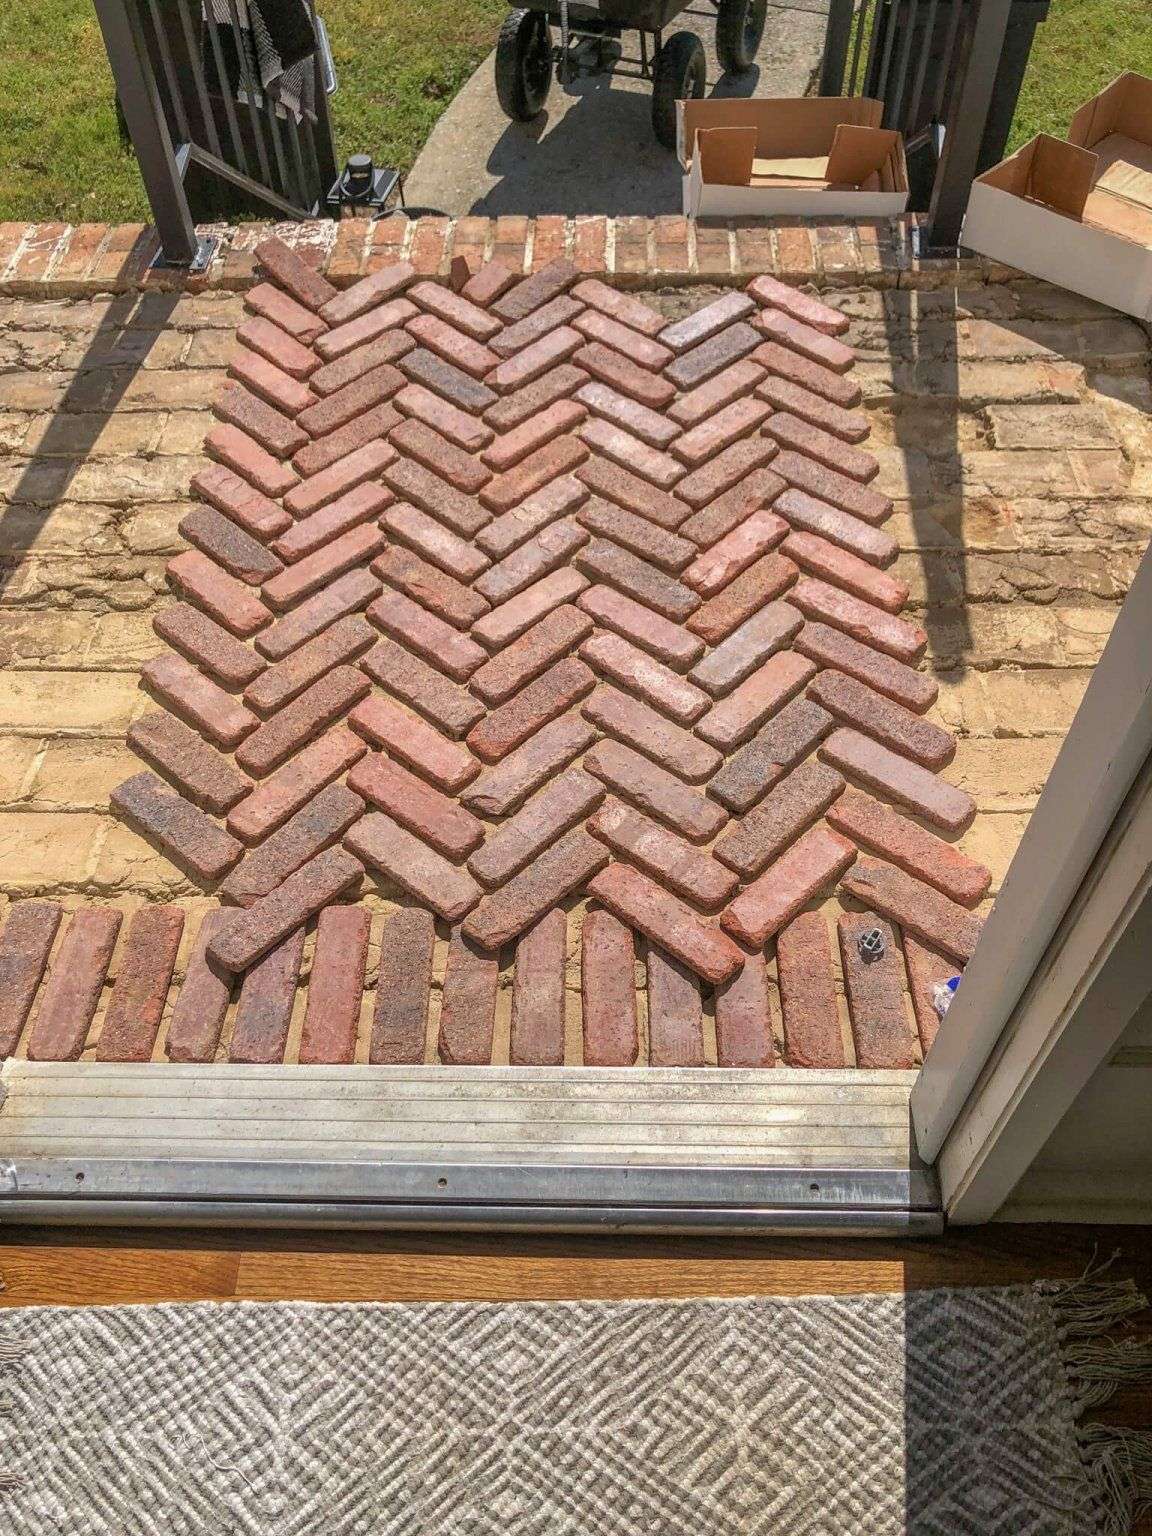 How to install and mortar wash a herringbone brick patio ...